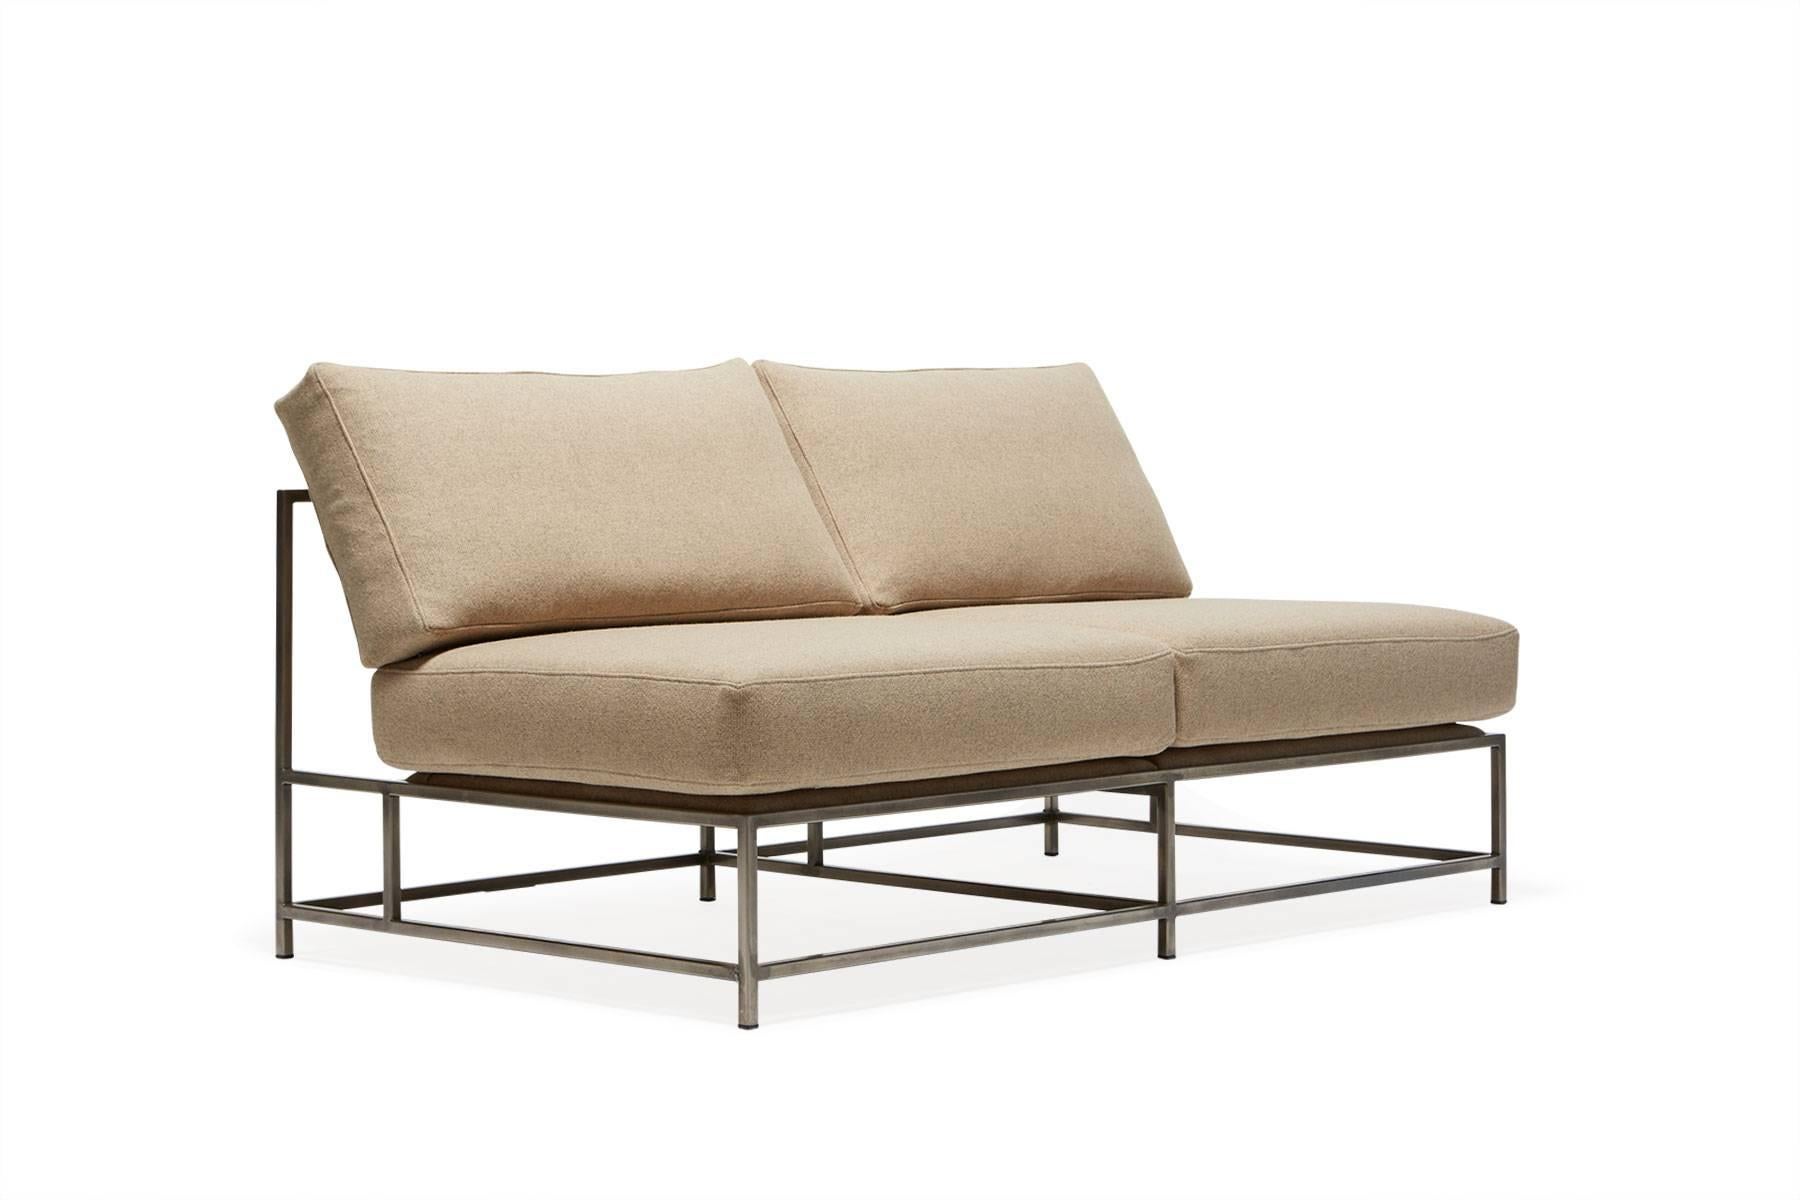 The Inheritance Loveseat by Stephen Kenn is as comfortable as it is unique. The design features an exposed construction composed of three elements - a steel frame, plush upholstery, and supportive belts. The deep seating area is perfect for a